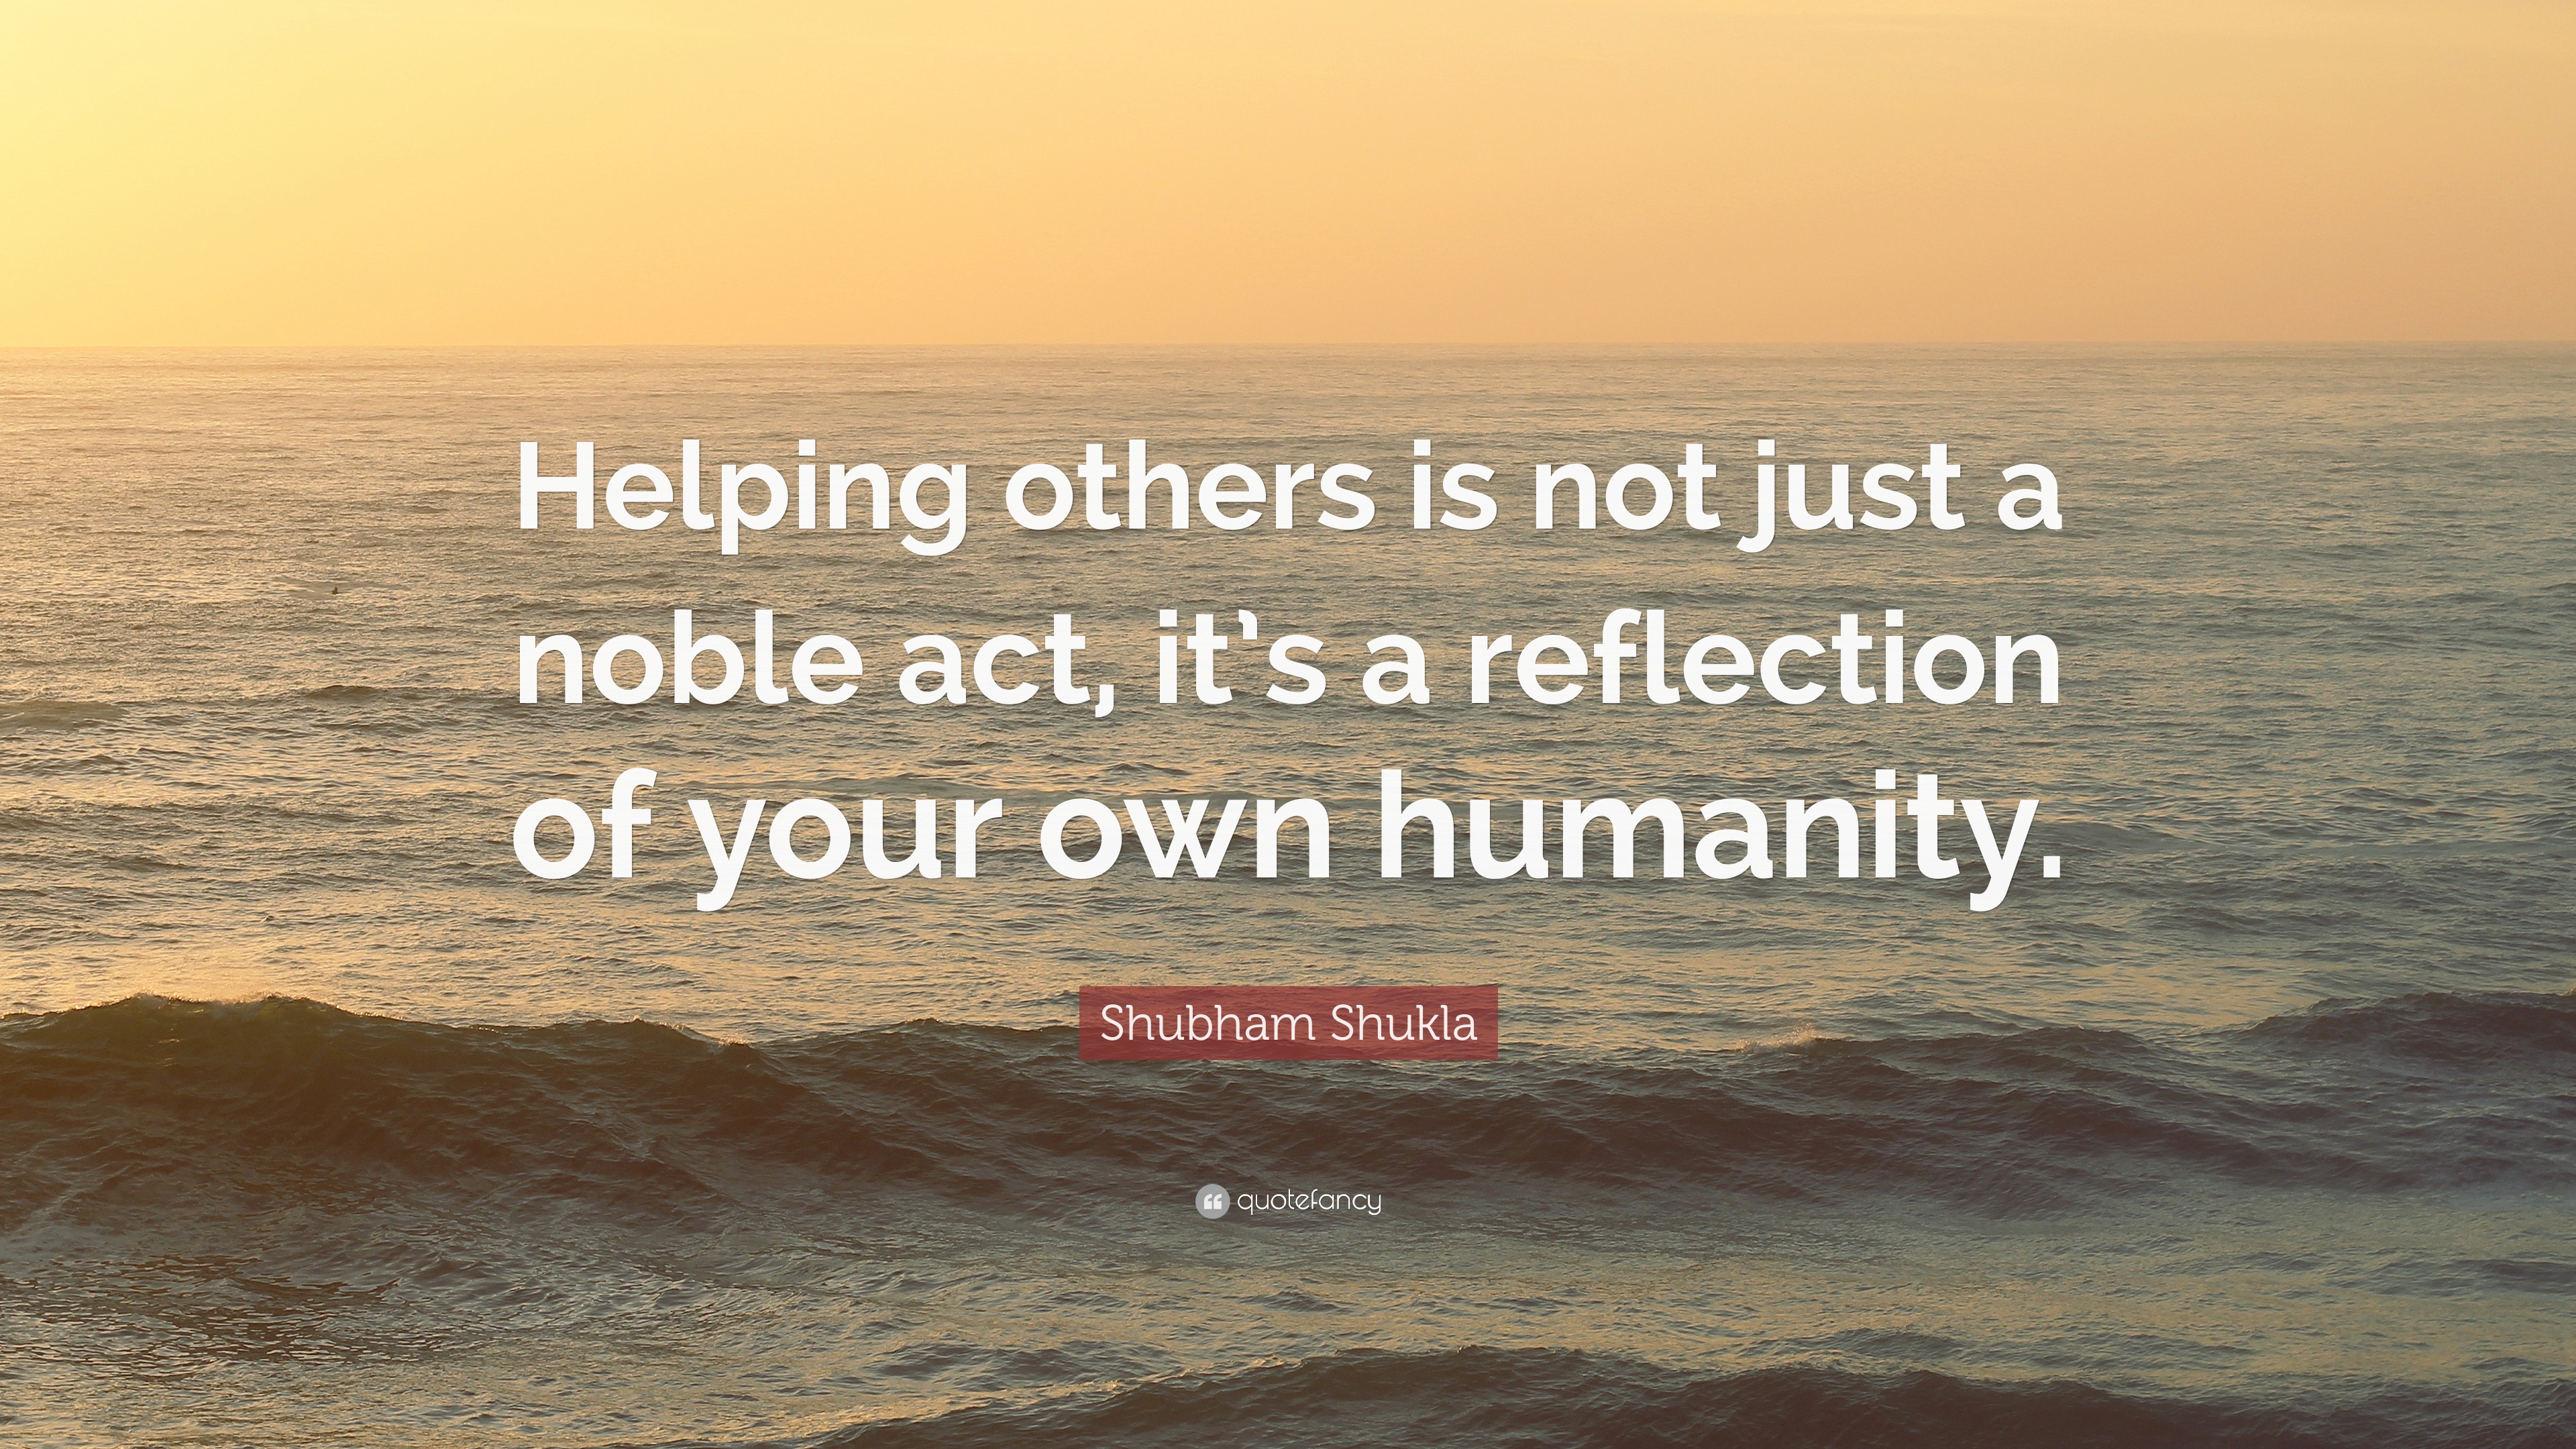 Shubham Shukla Quote: “Helping others is not just a noble act, it’s a ...